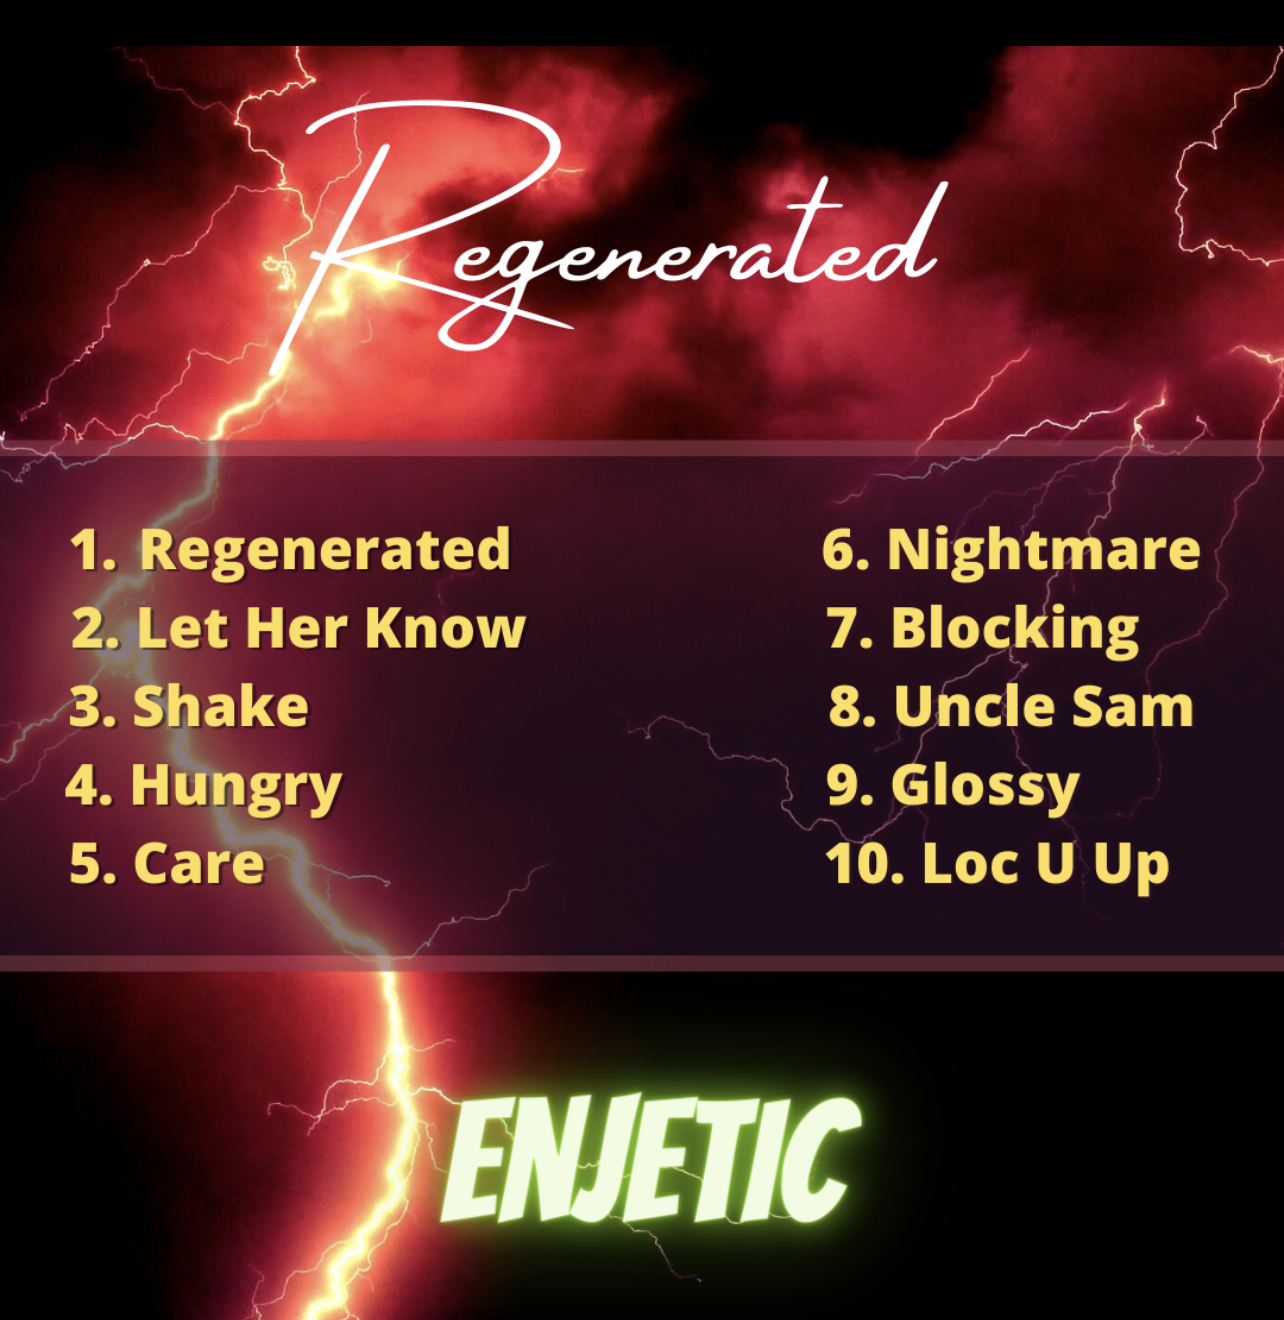 Interview with NY Hip-Hop Artist/Activist Enjetic on his Upcoming album ‘REGENERATED’